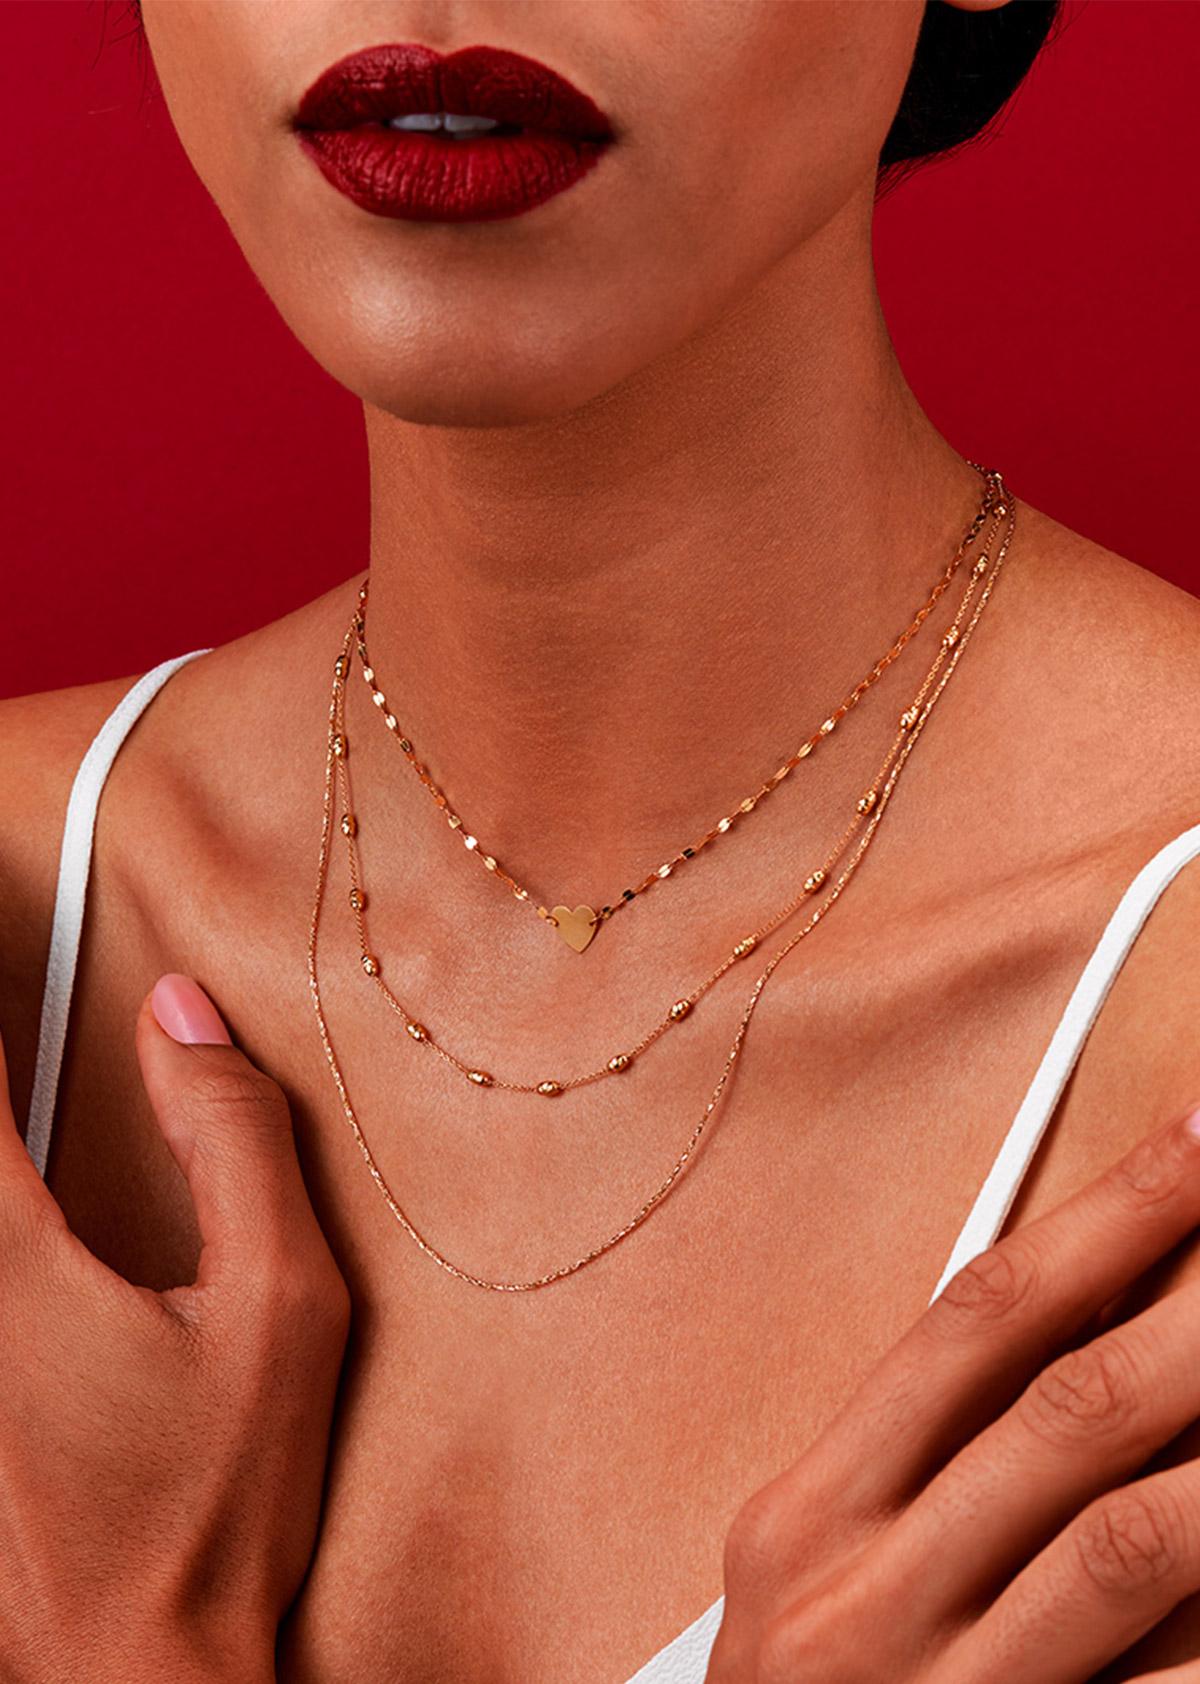 How Your Jewellery Spells Out Your Vibe? Fun and Playful girl wearing silver rings and necklace